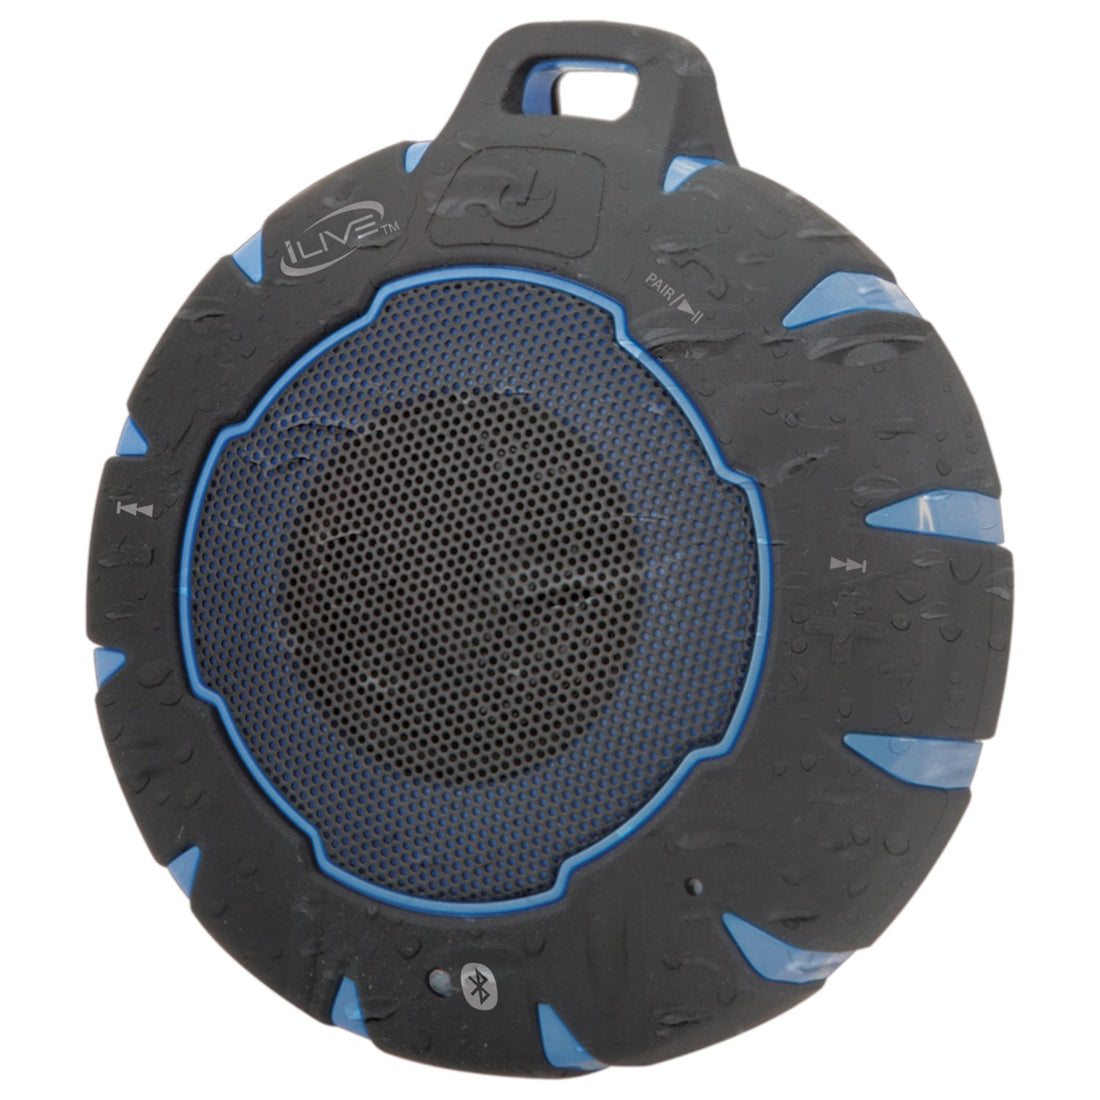 iLive Waterproof Wireless Speaker, Includes Detachable Carabiner Clip and Micro-USB to USB Cable, Black/Blue (iSBW157BU)